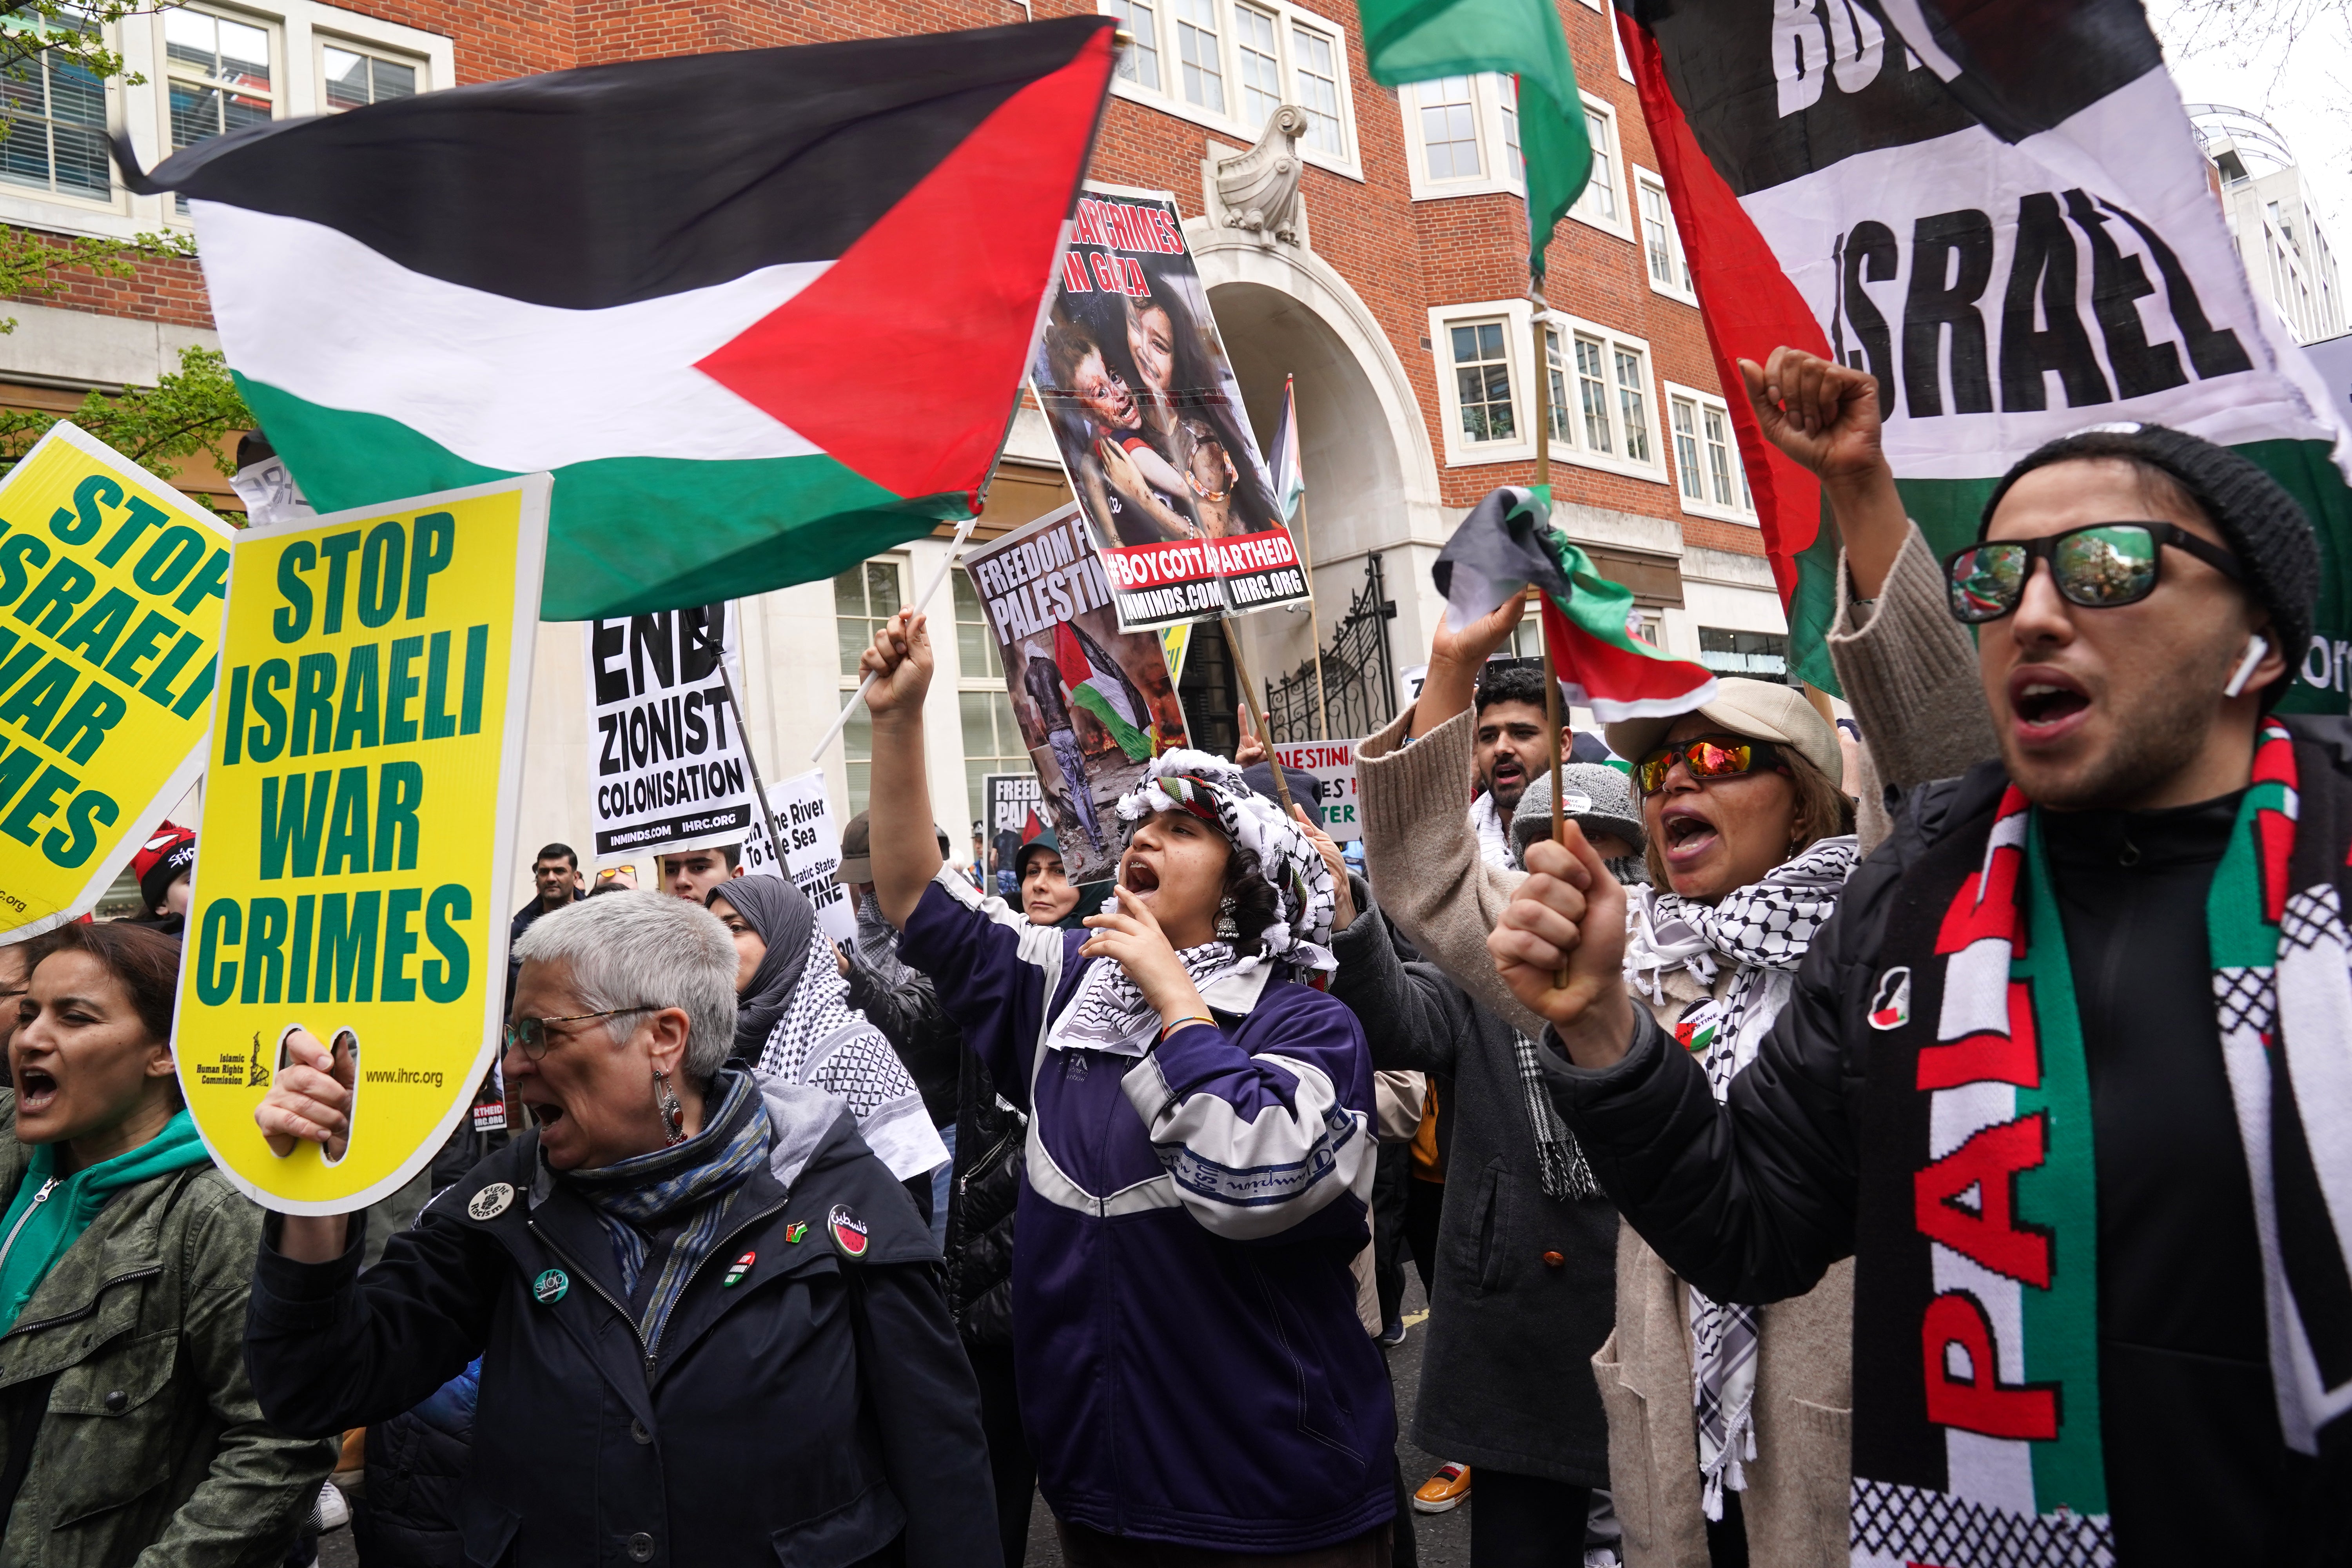 Demonstrators take part in the annual Al Quds day march in support of Palestine in London on Friday